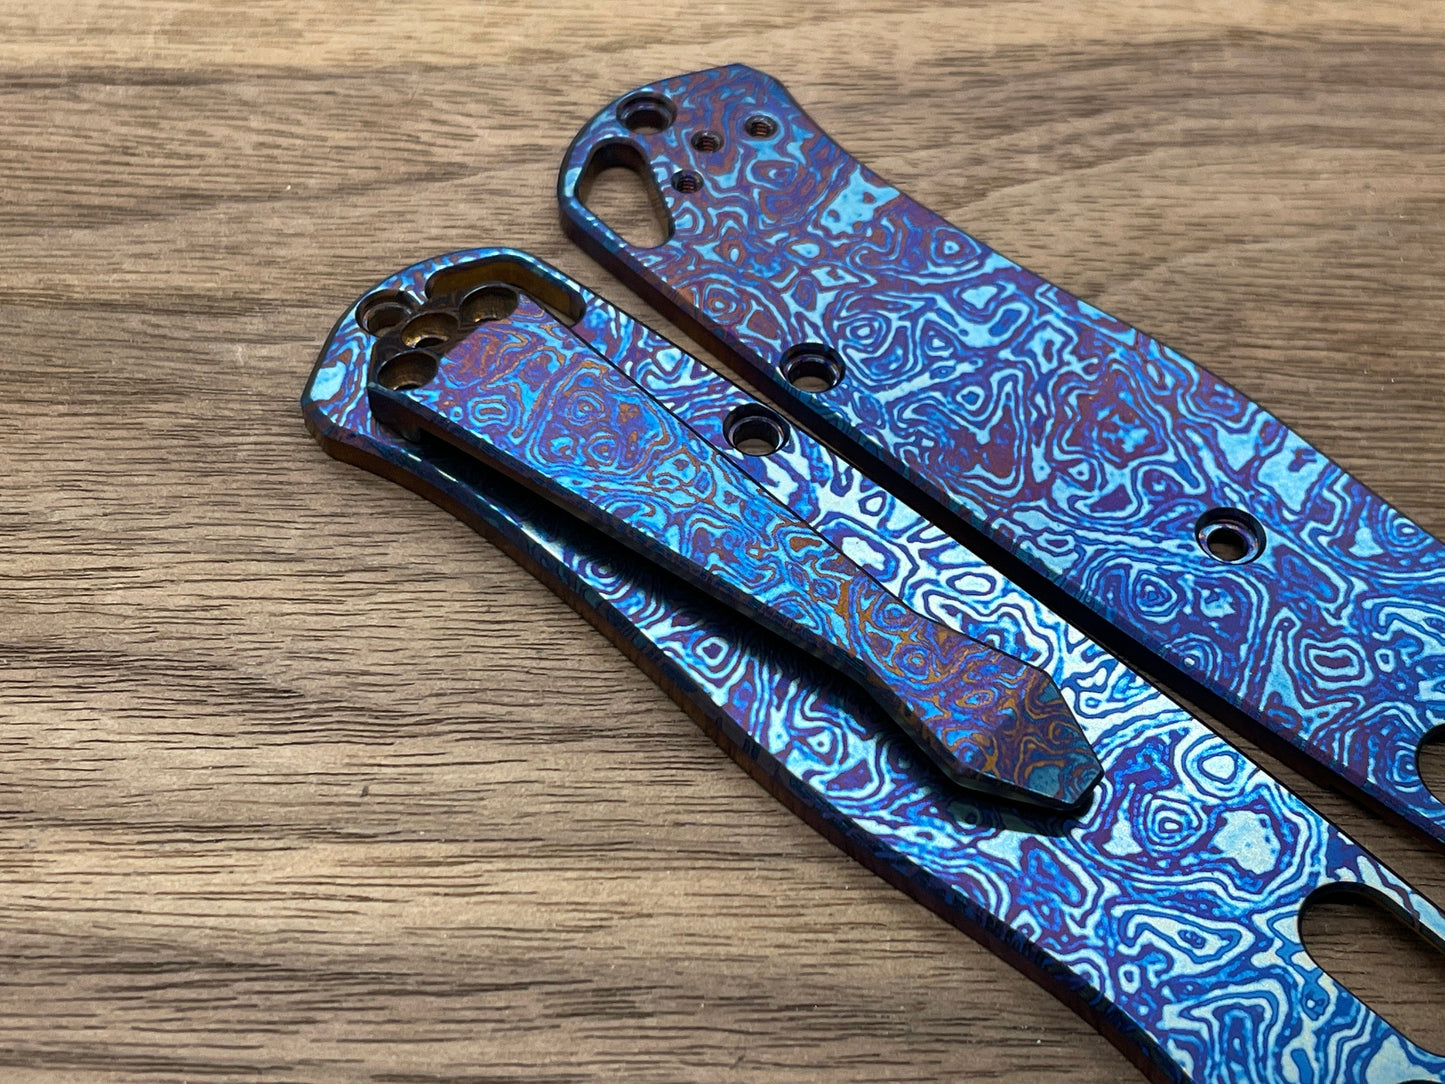 ALIEN heat ano engraved Dmd Titanium CLIP for most Benchmade models